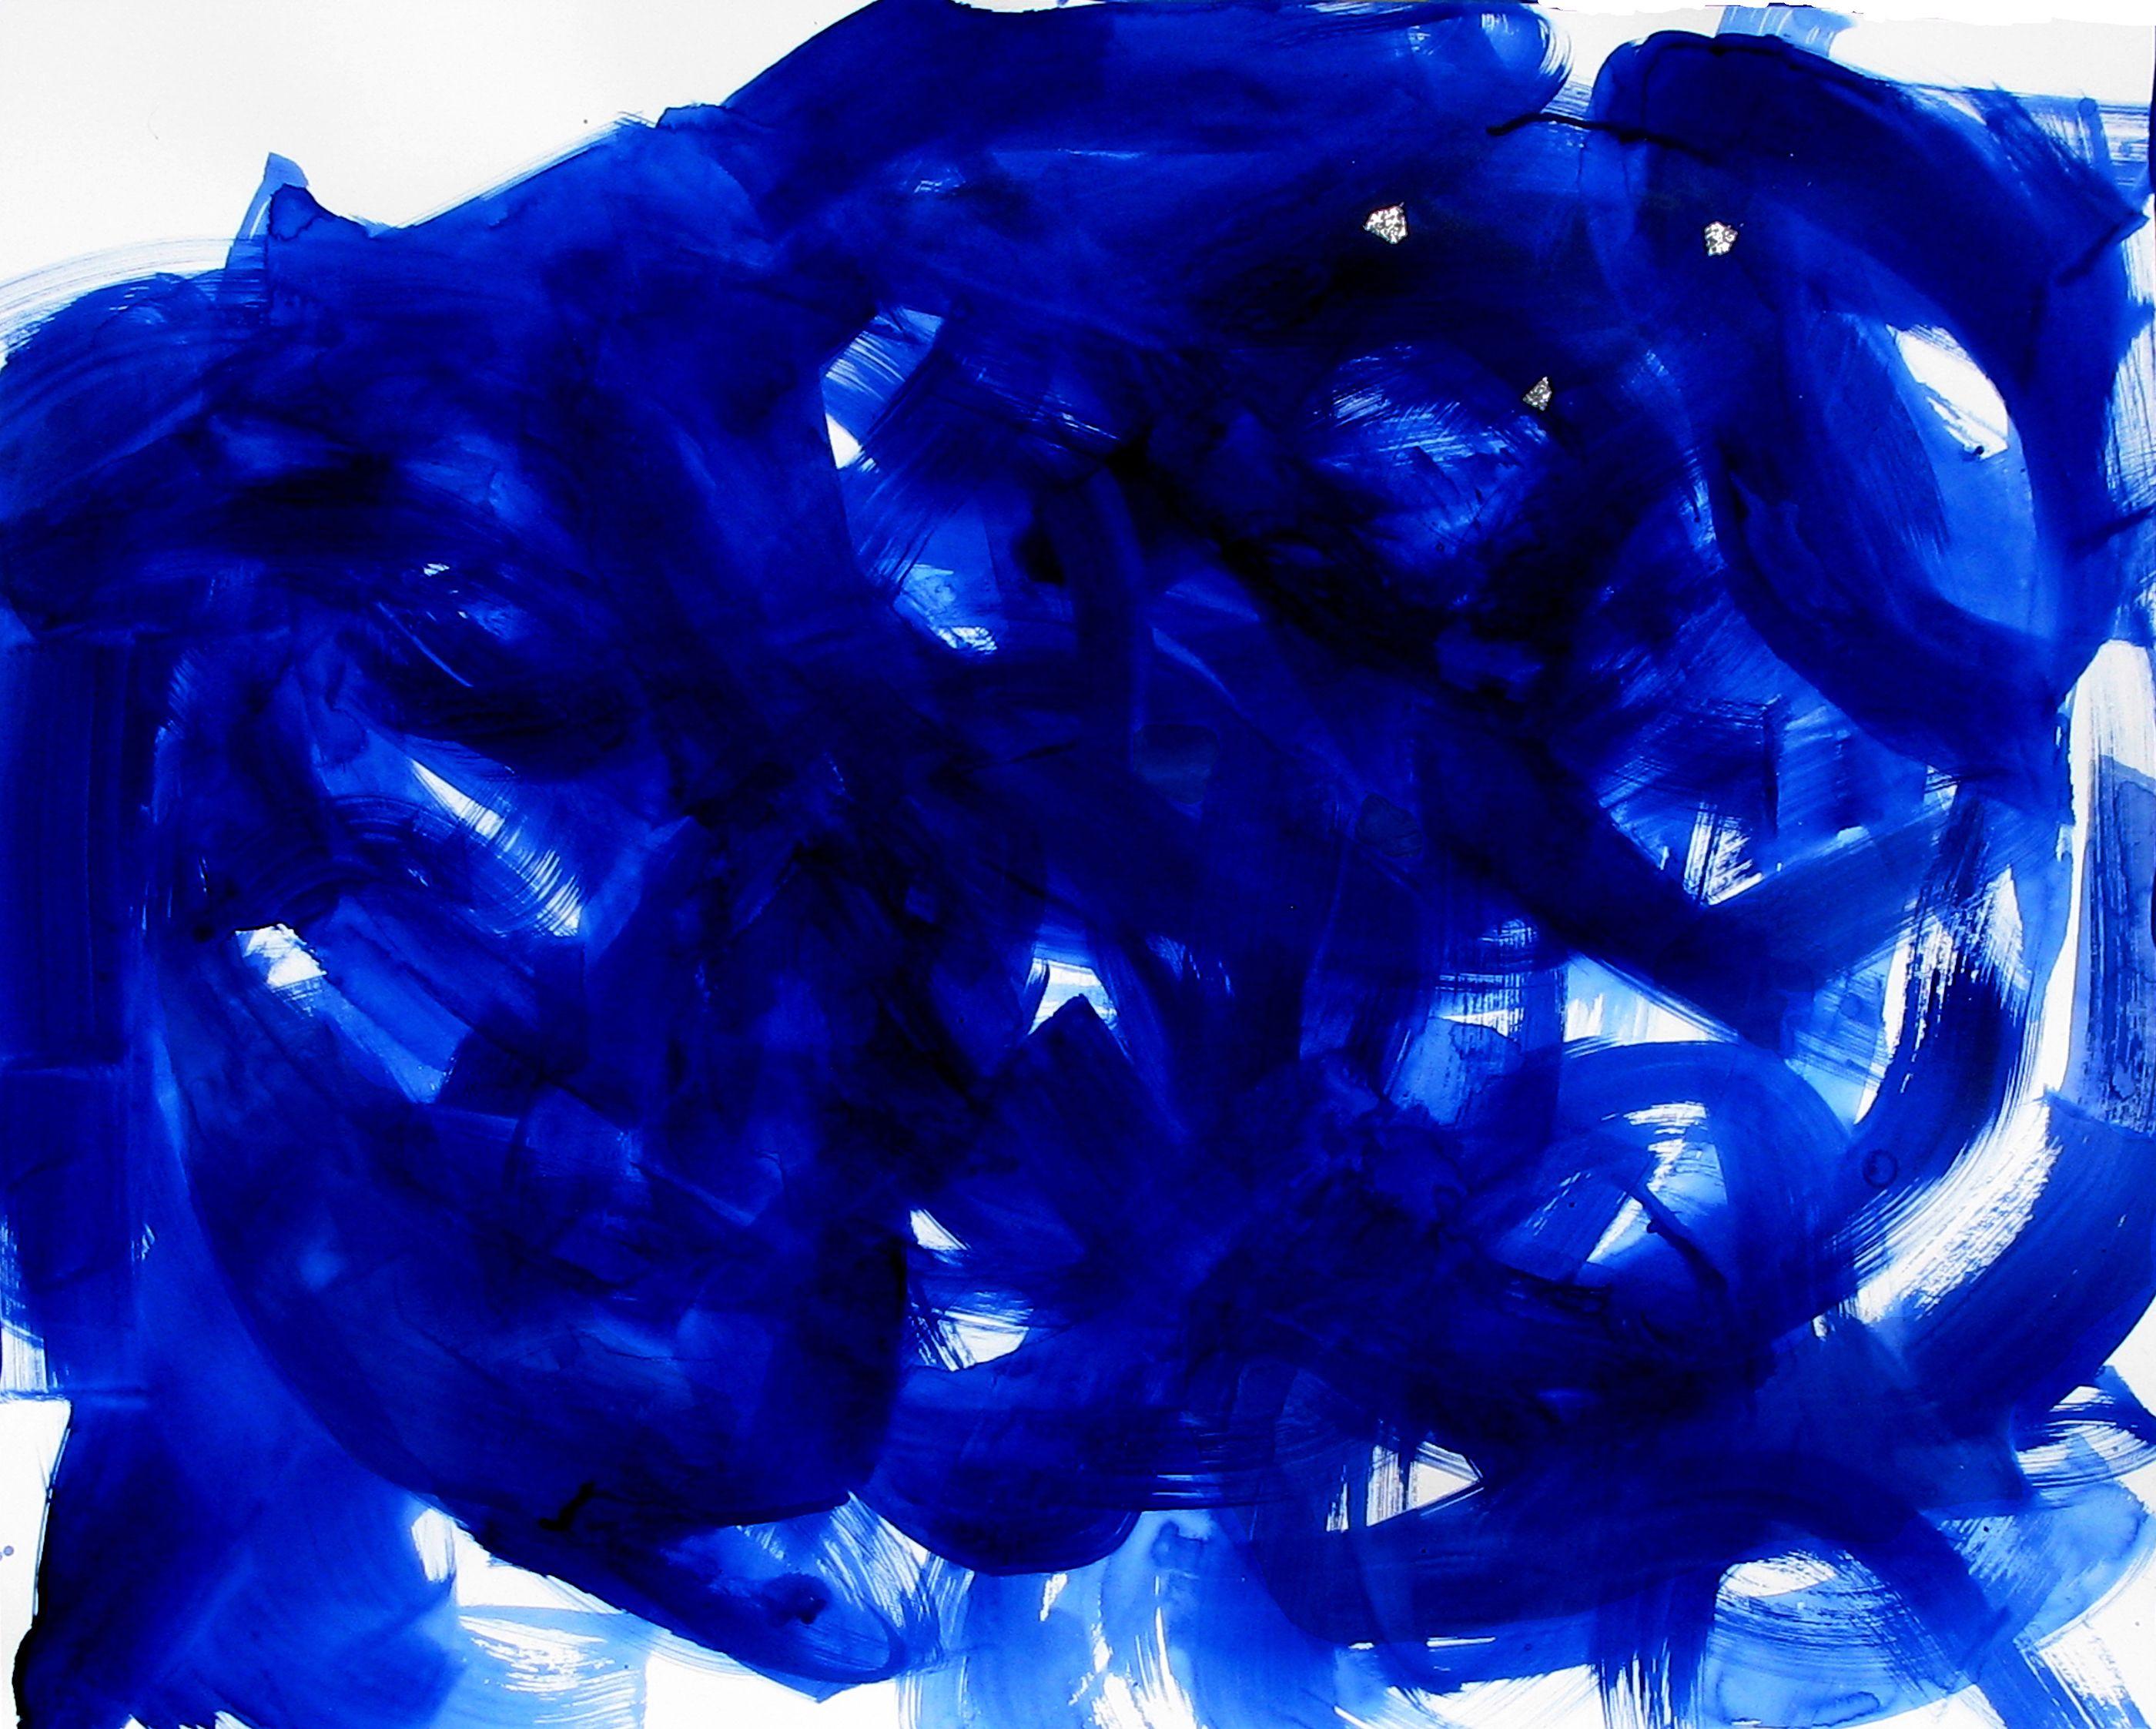 Sapphire Blue Water - SEA Diamonds - on Paper / Abstract Color Field / Fresh, Harmony, Action / High Quality Materials / Frame to your decor or mount / For home or business (hang horizontal or Vertical) / Protective varnish to enhance color /